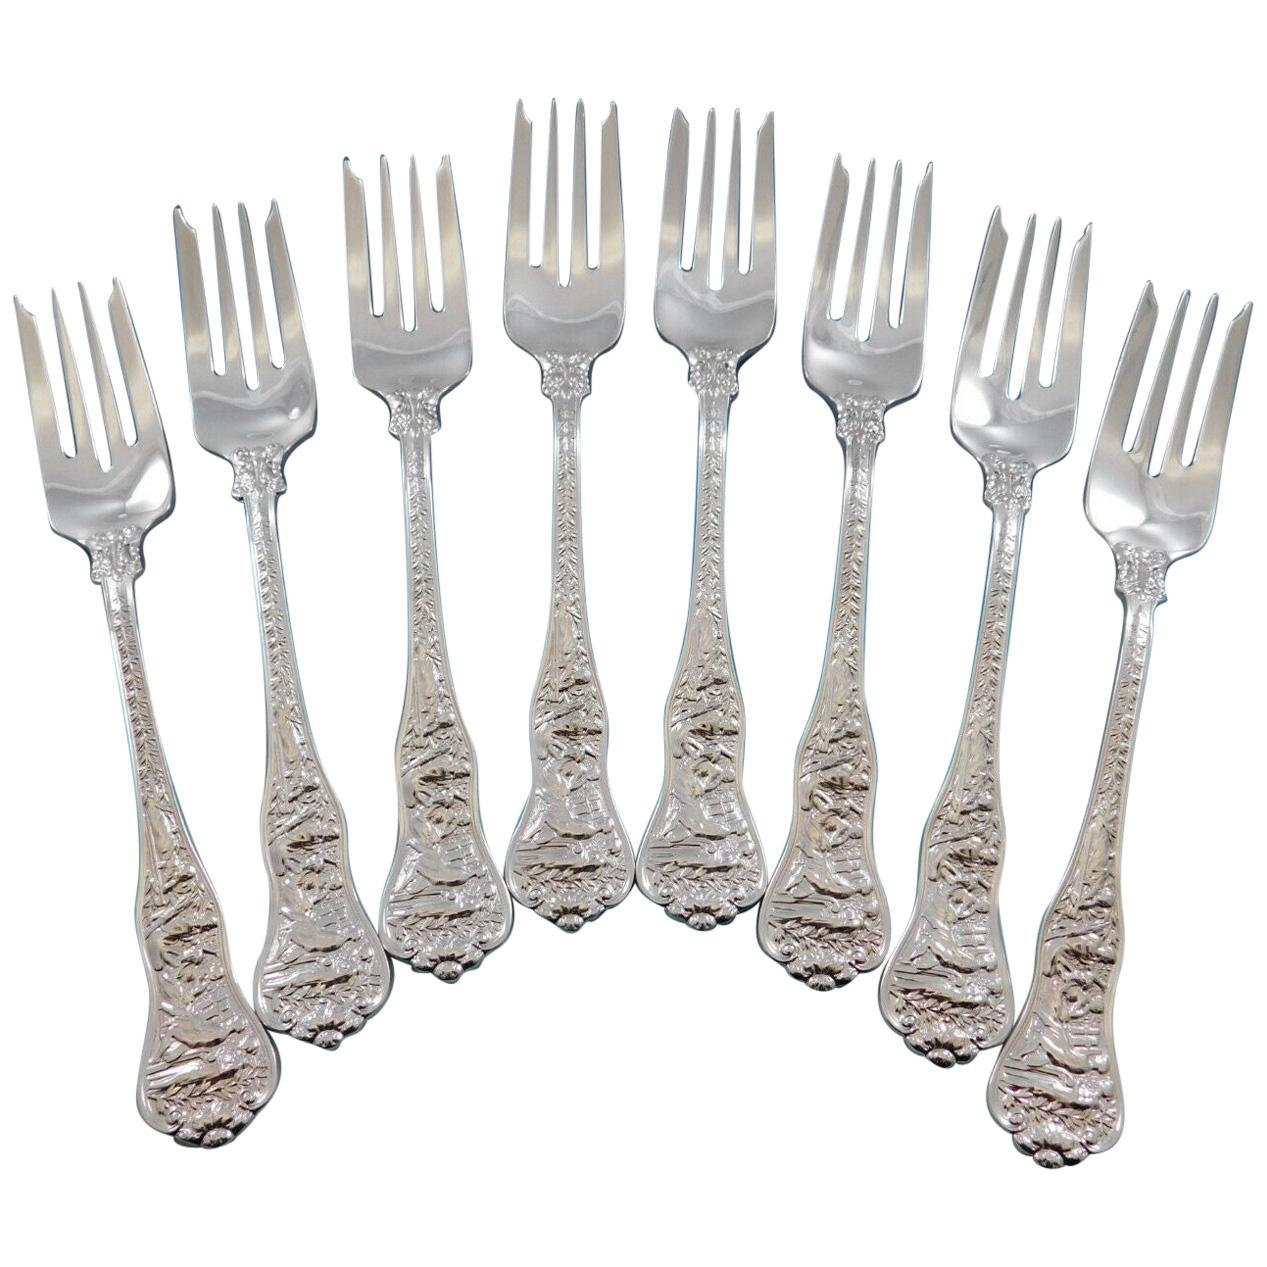 Olympian by Tiffany & Co Sterling Silver Set of 8 Salad Forks New Unused 6 3/4"